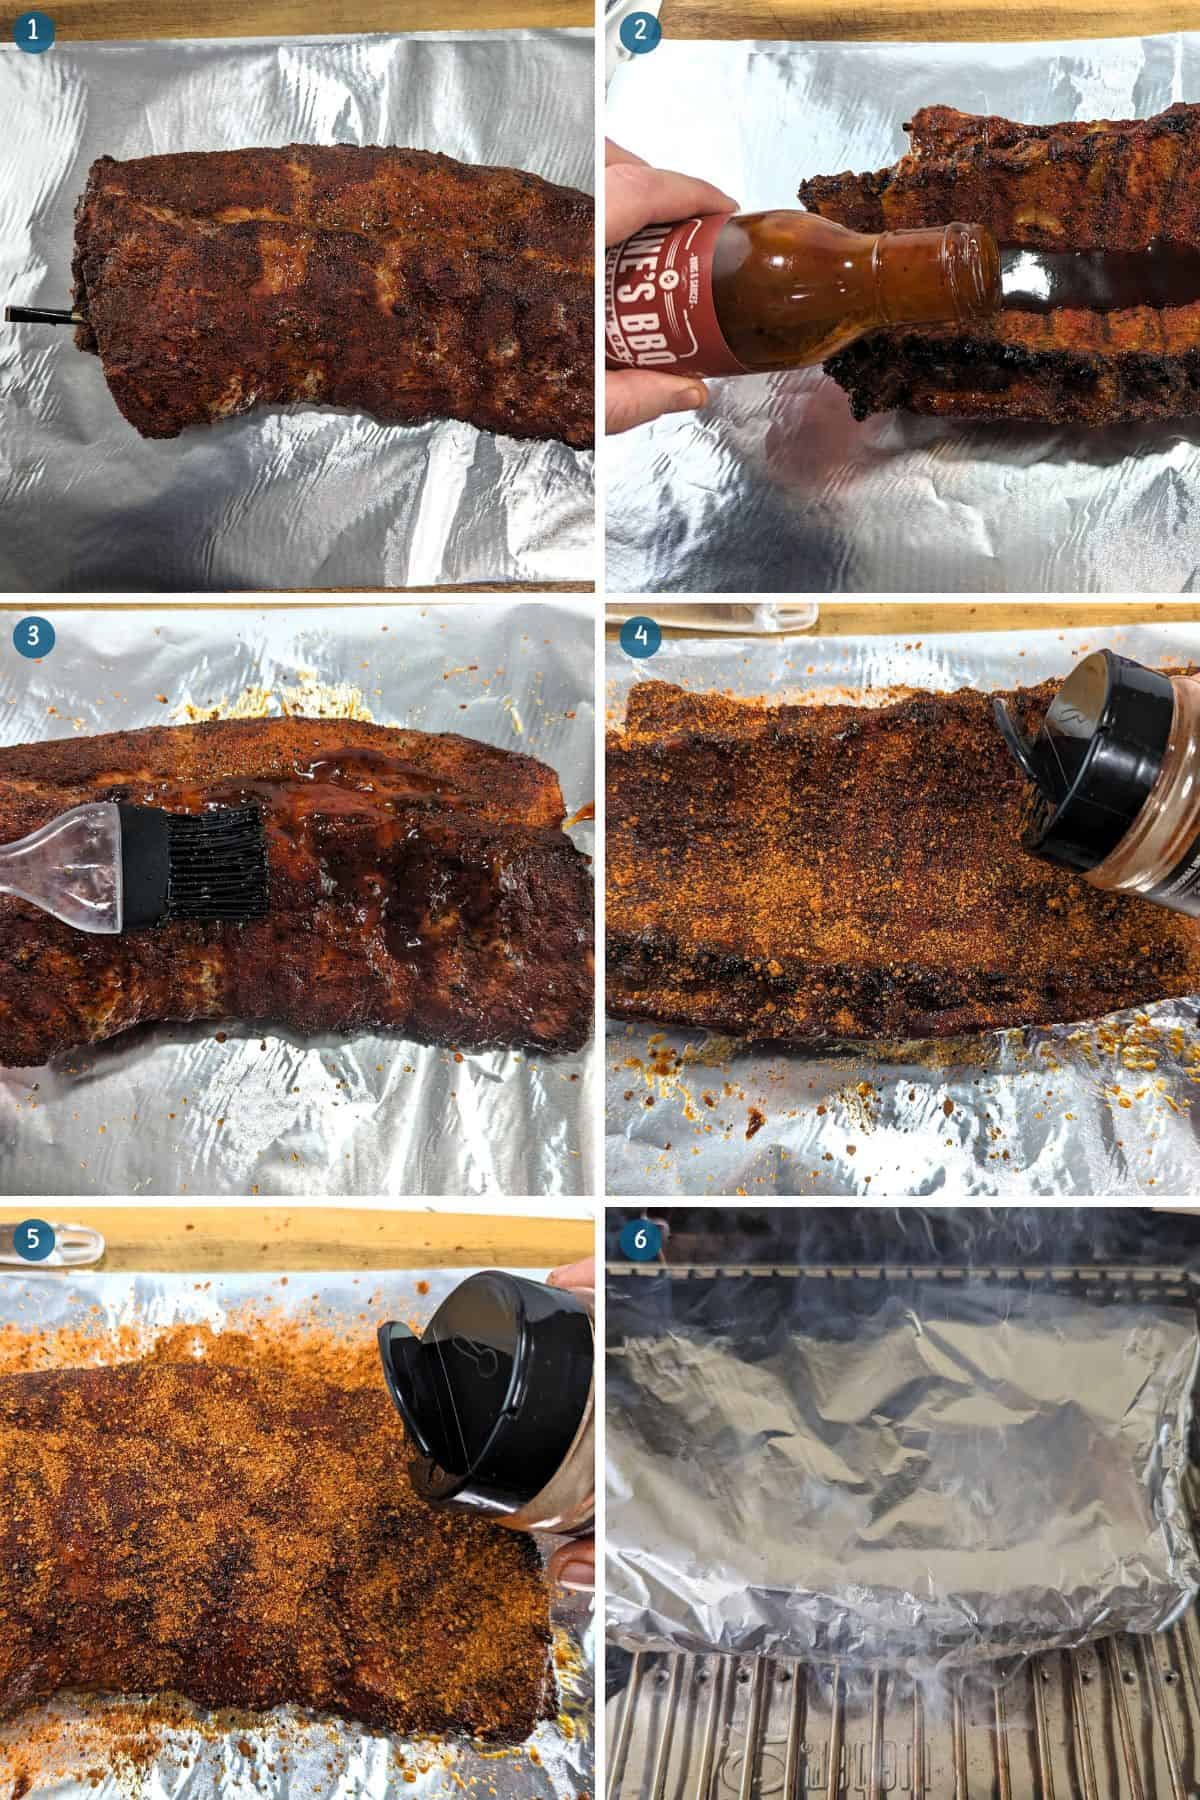 Drizzling Lane's BBQ Sauce and More Lane's Magic Rub onto the Baby Back Ribs